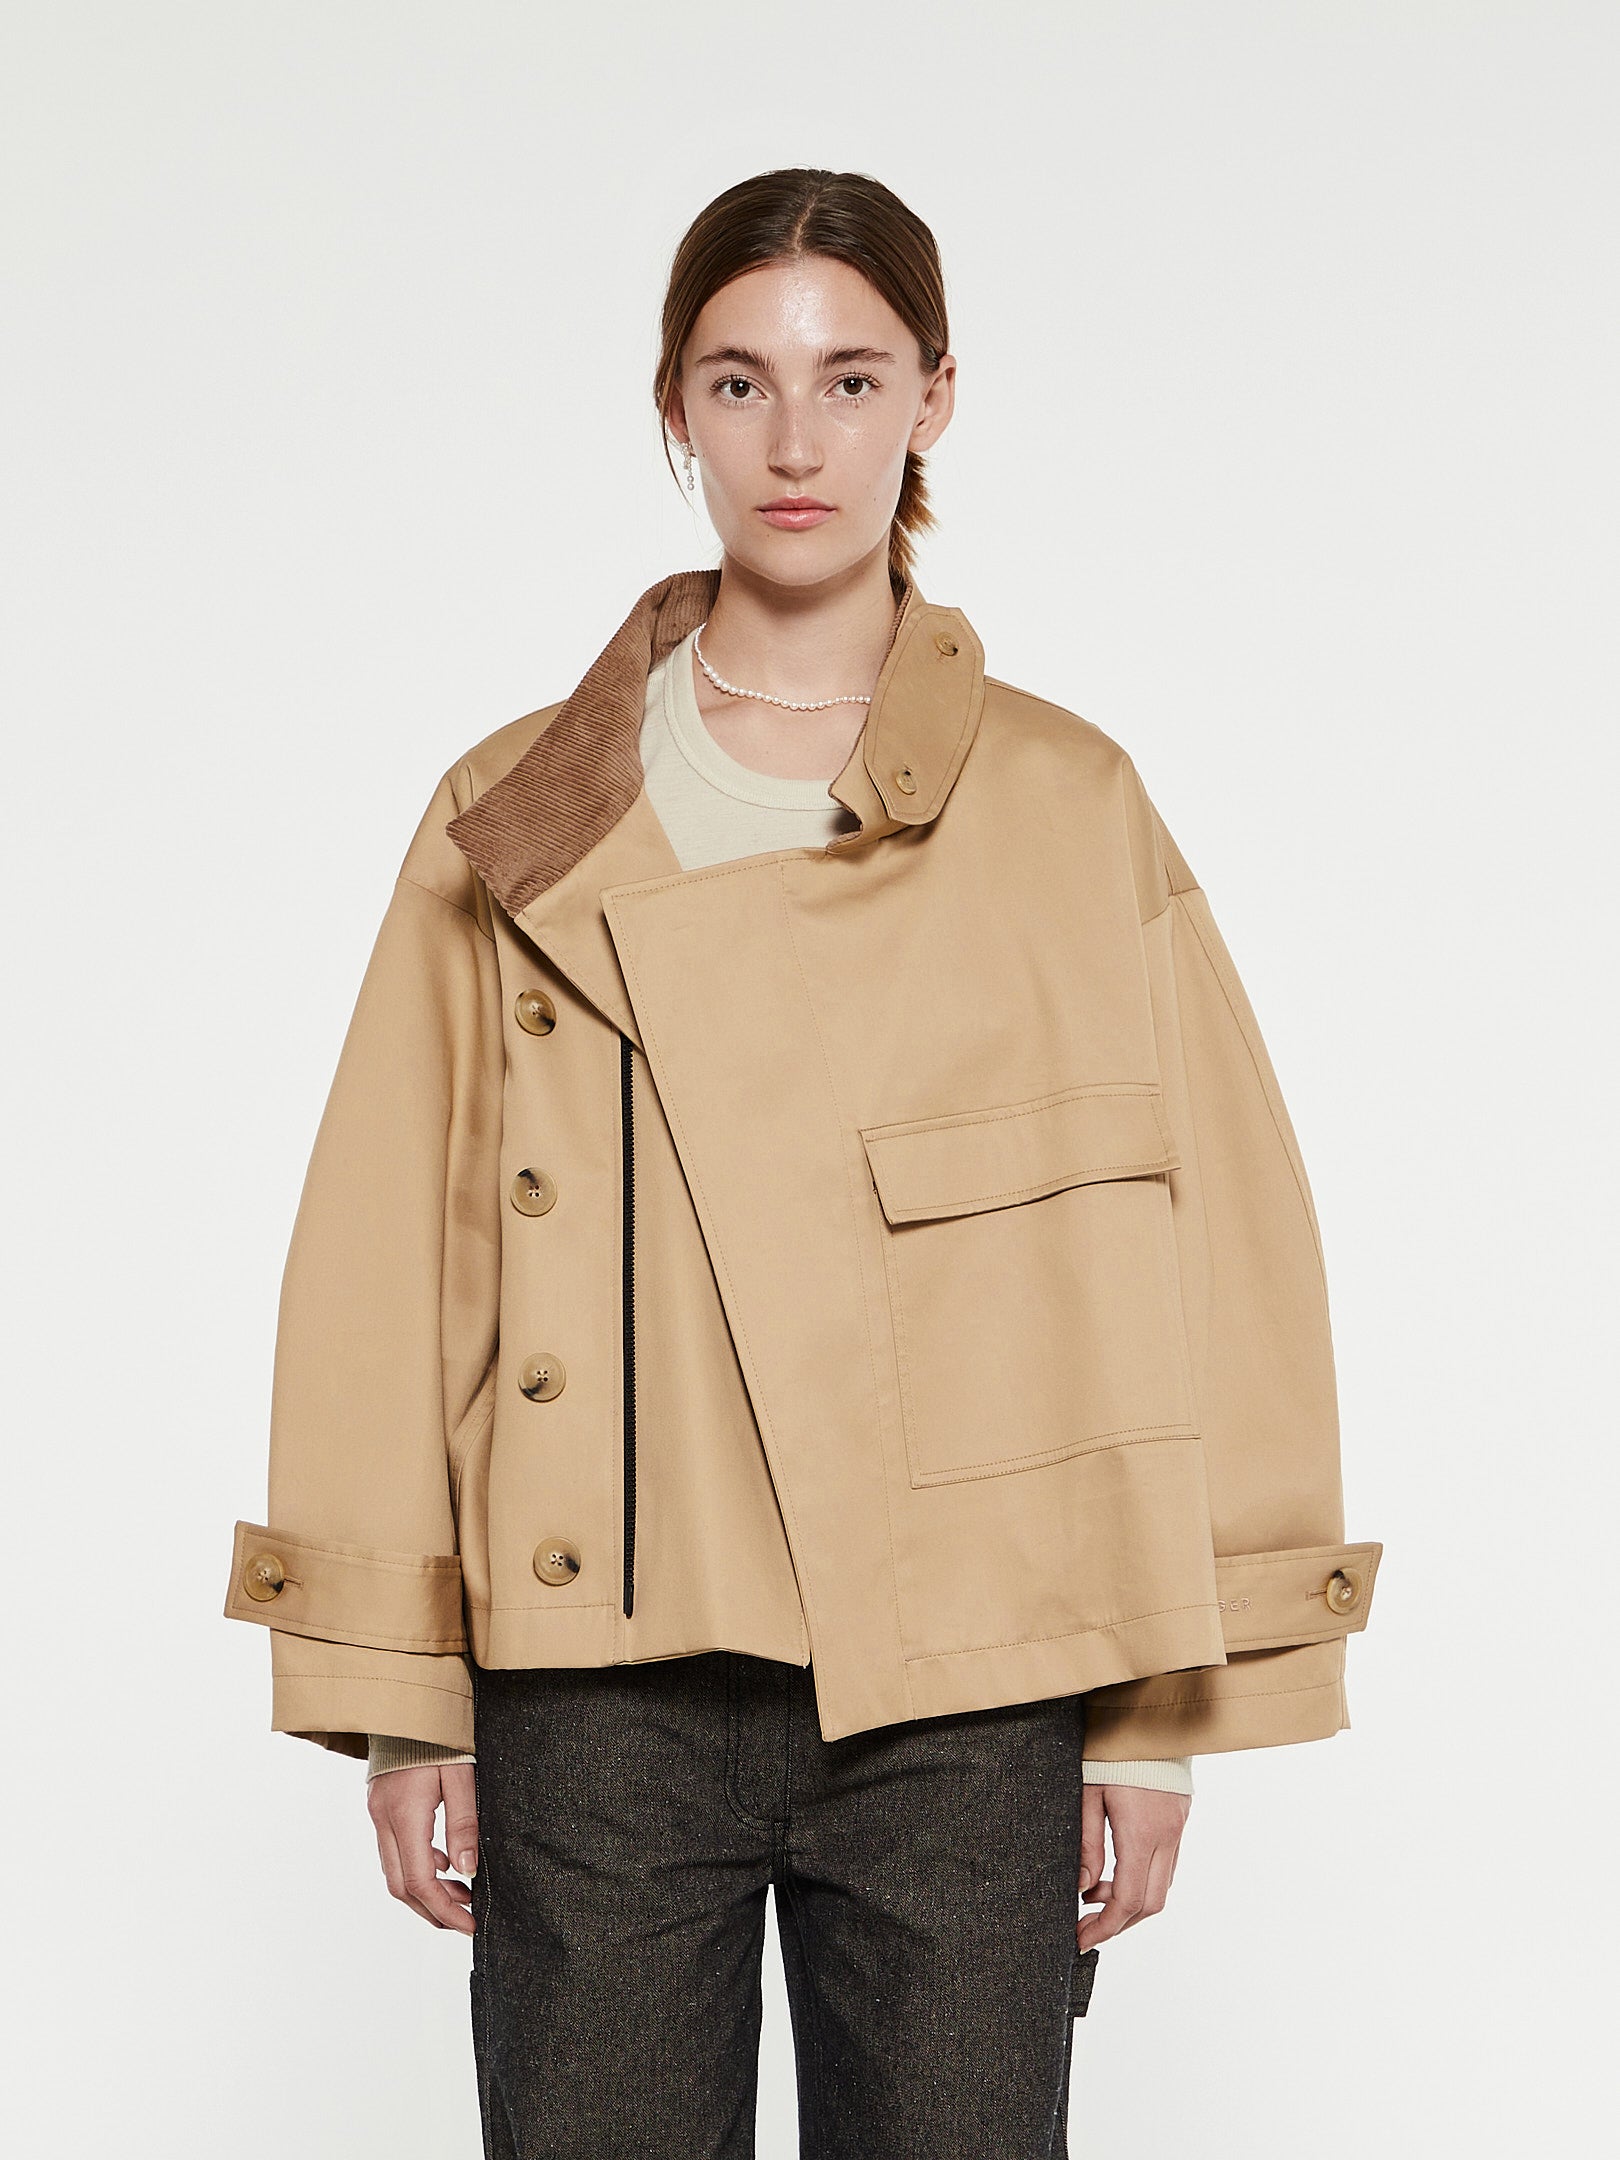 Coats & Jackets for women | Shop the selection at stoy